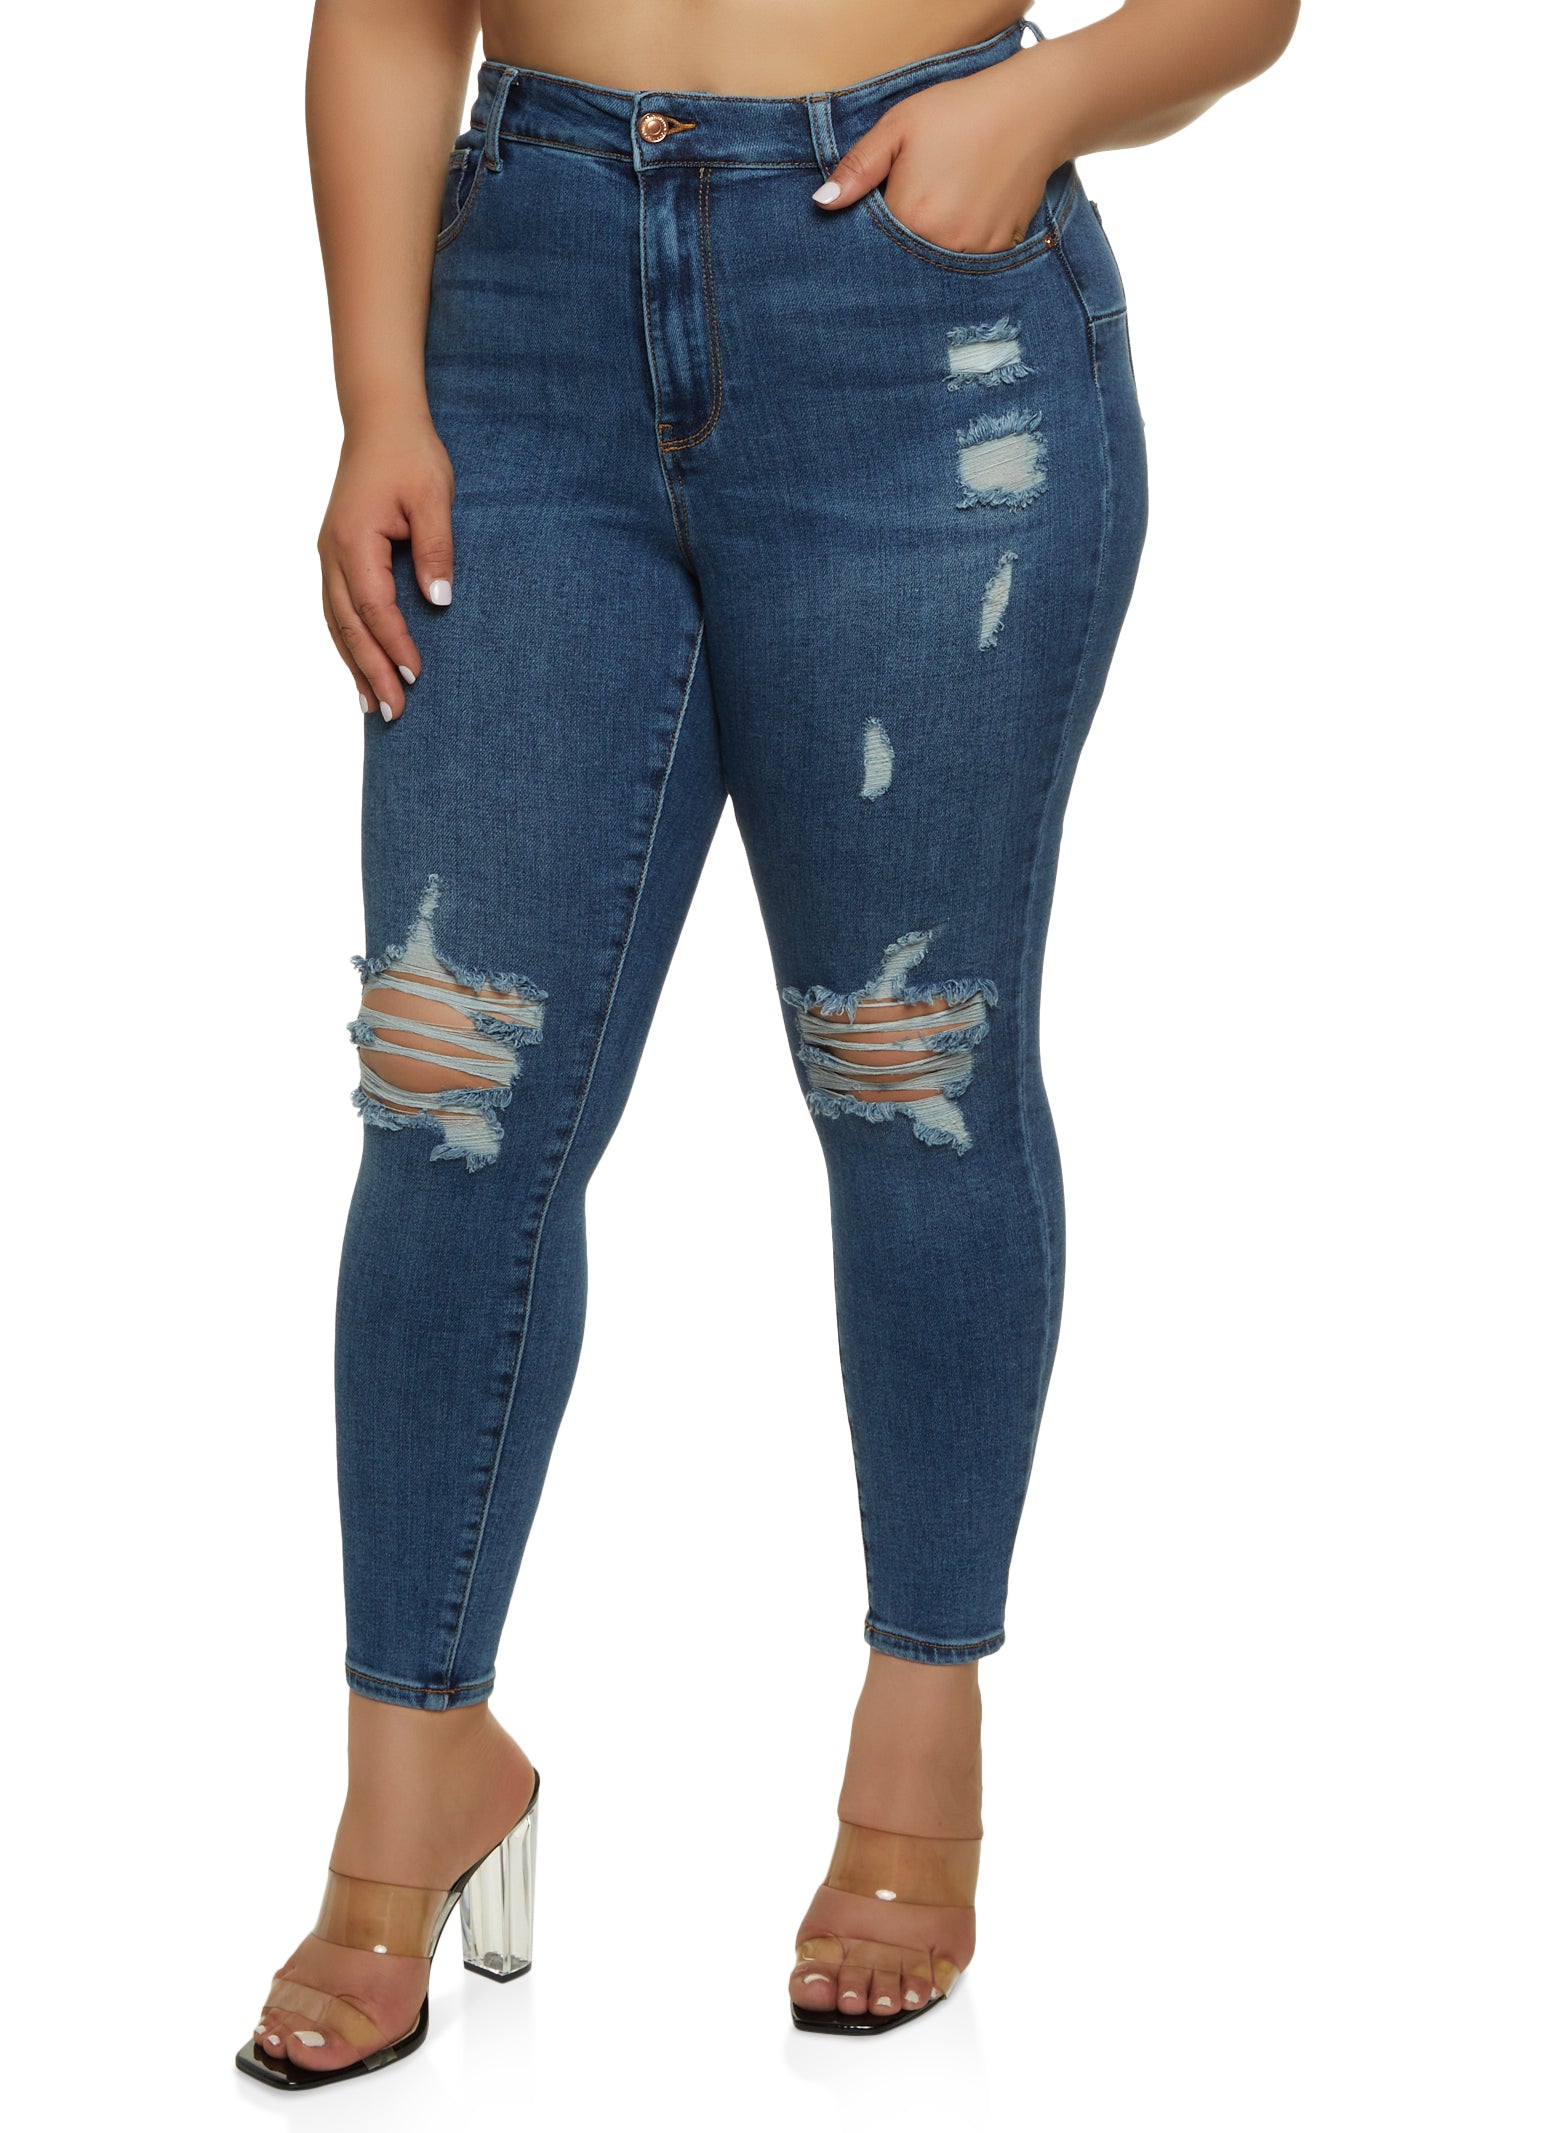 Plus Size Ripped Jeans for Women, Everyday Low Prices